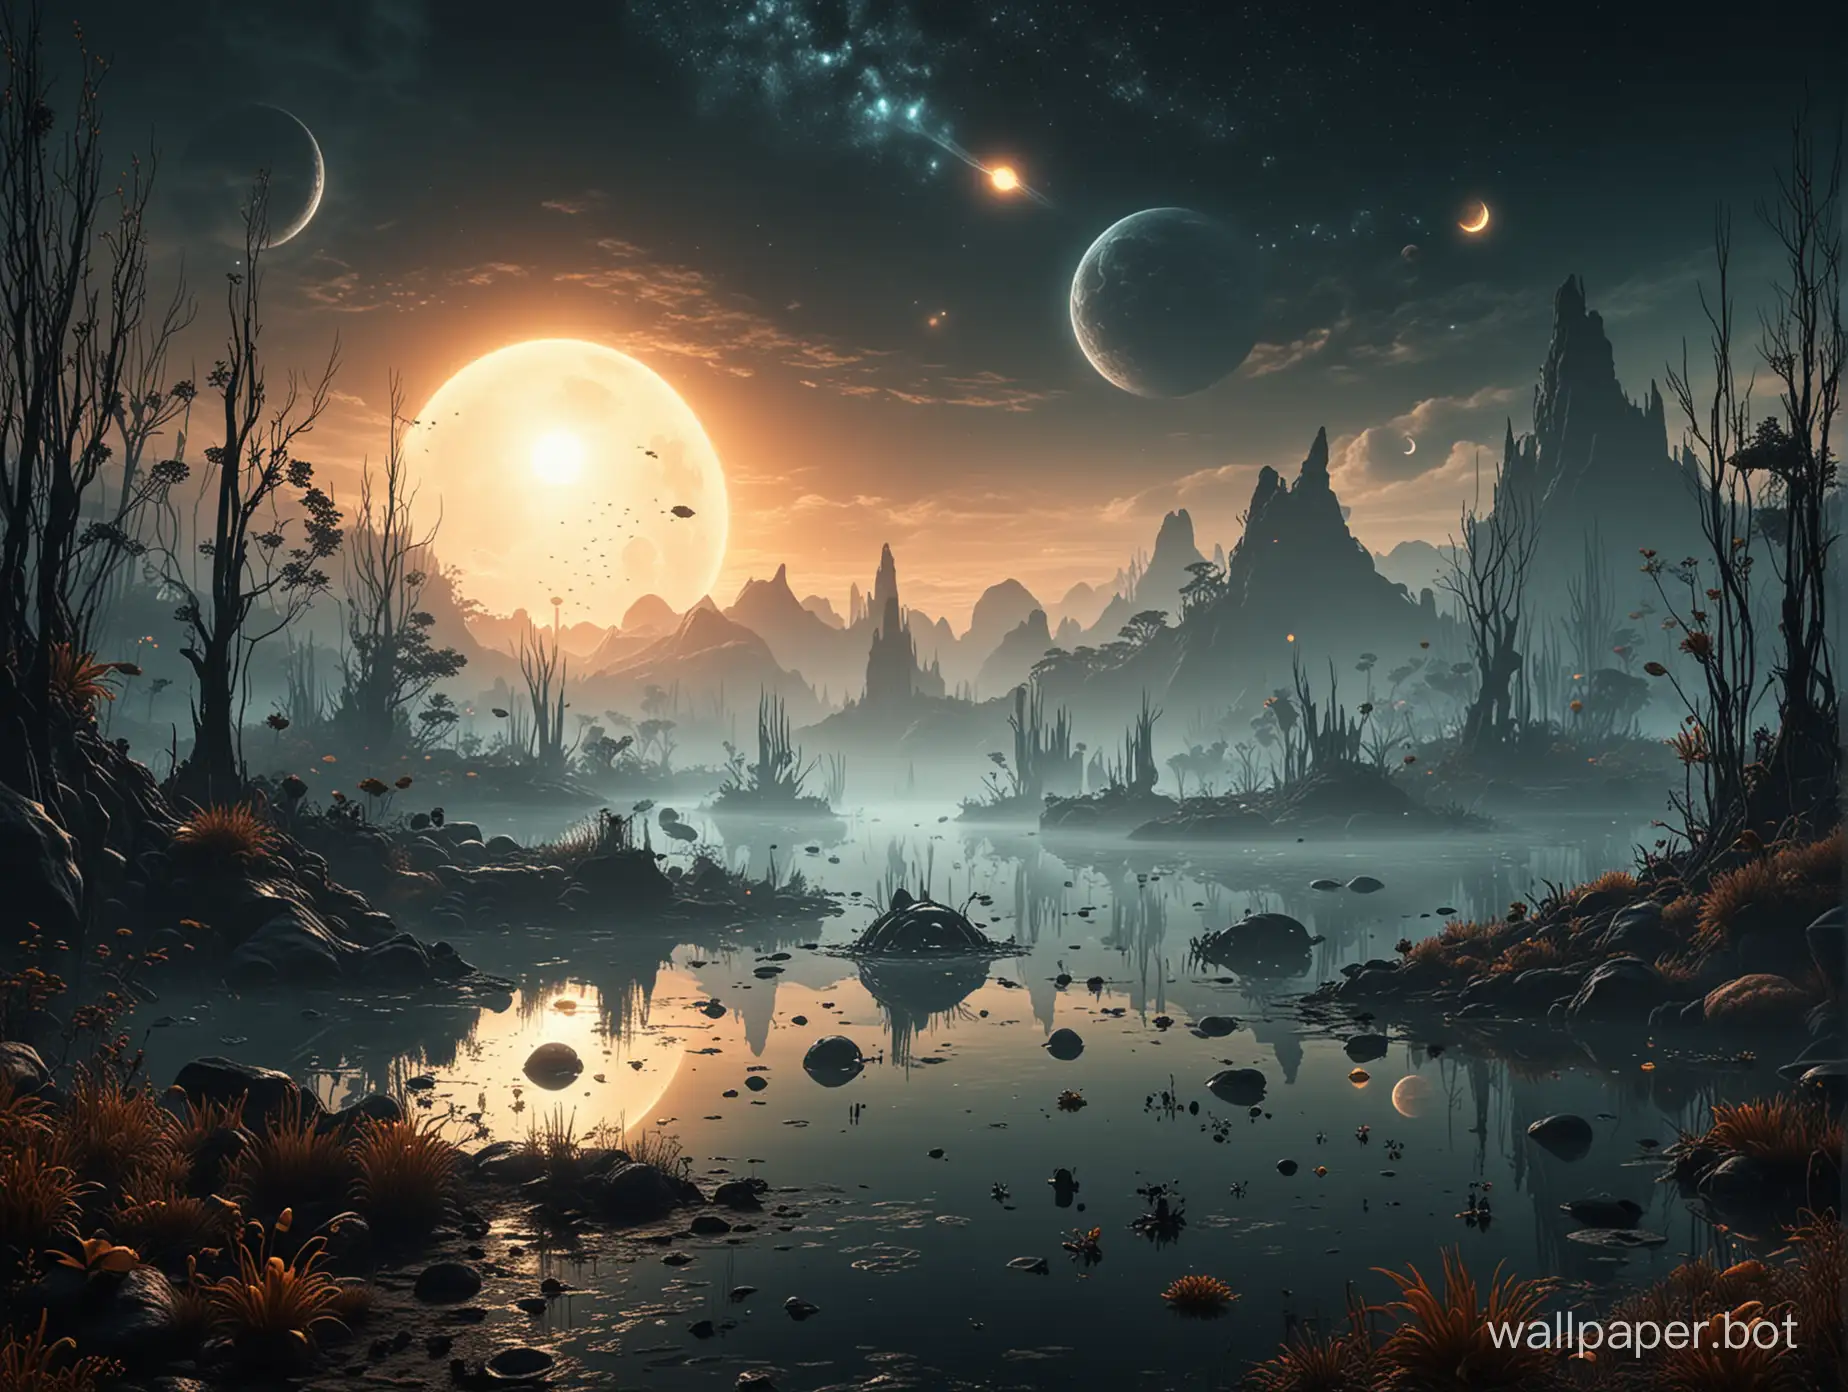 dark fogy planet with  strange scary lake and plants fishes birds bugs and aliens with strange sun moons and alien spaceship in the horizon